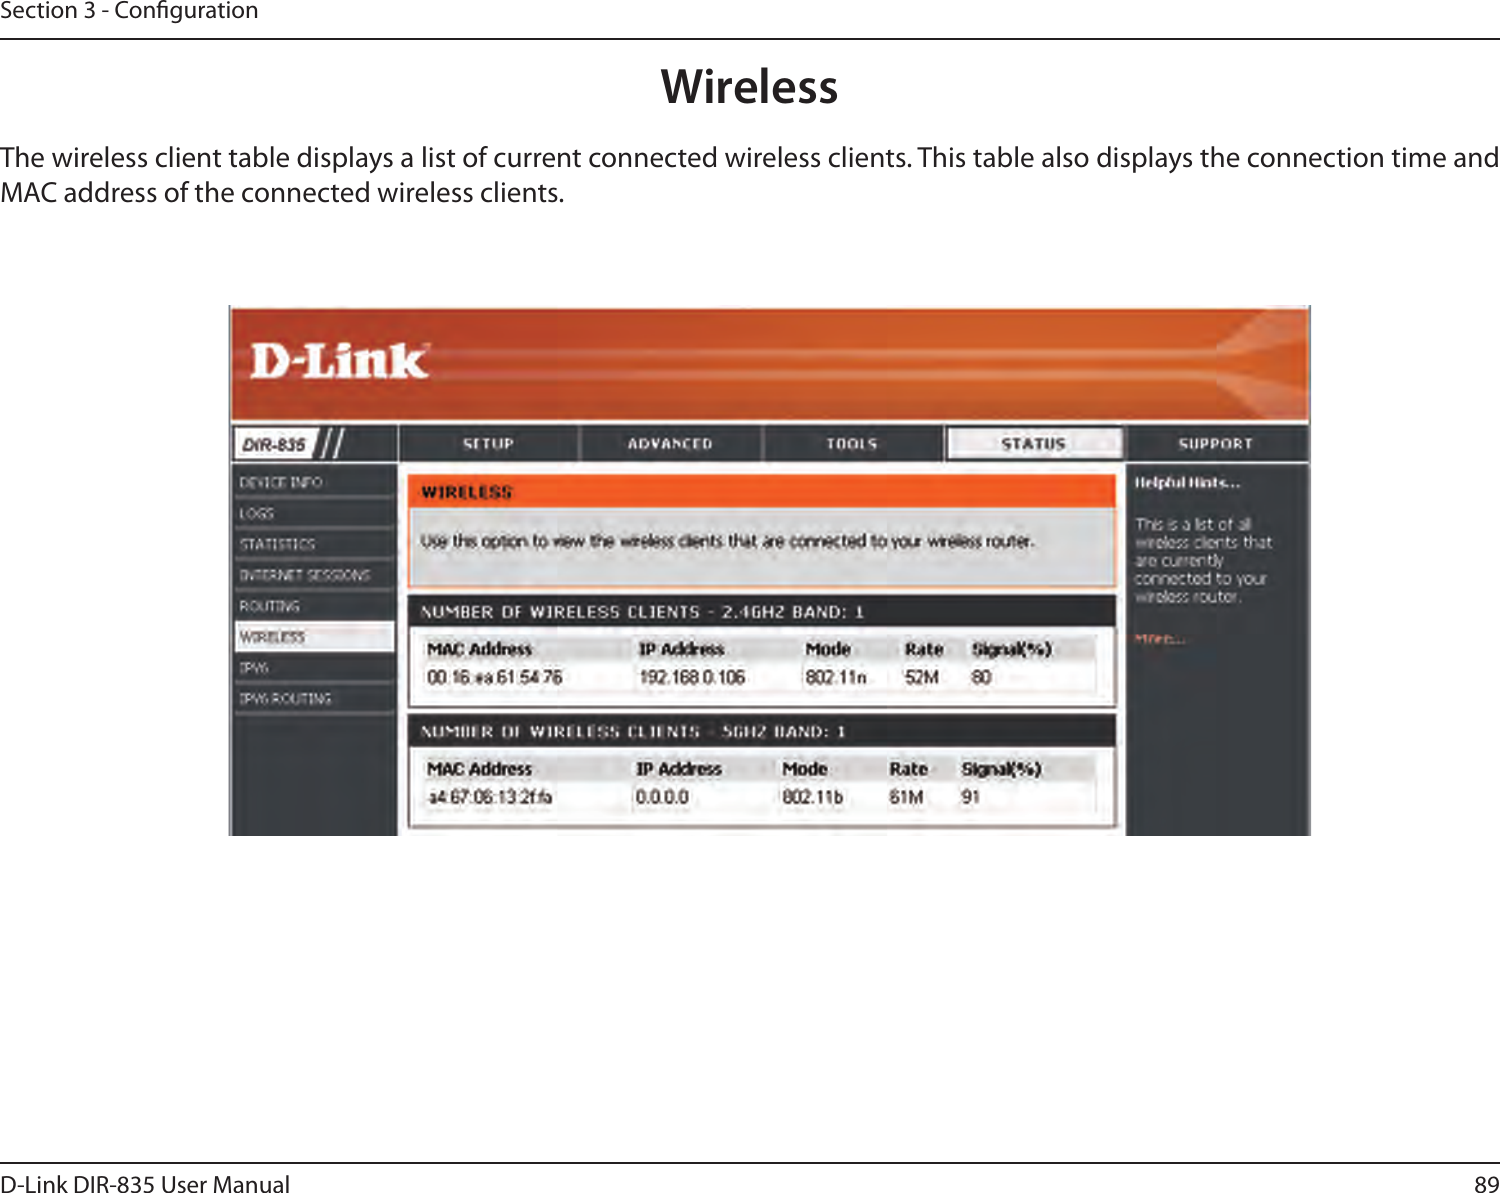 89D-Link DIR-835 User ManualSection 3 - CongurationThe wireless client table displays a list of current connected wireless clients. This table also displays the connection time and MAC address of the connected wireless clients.Wireless